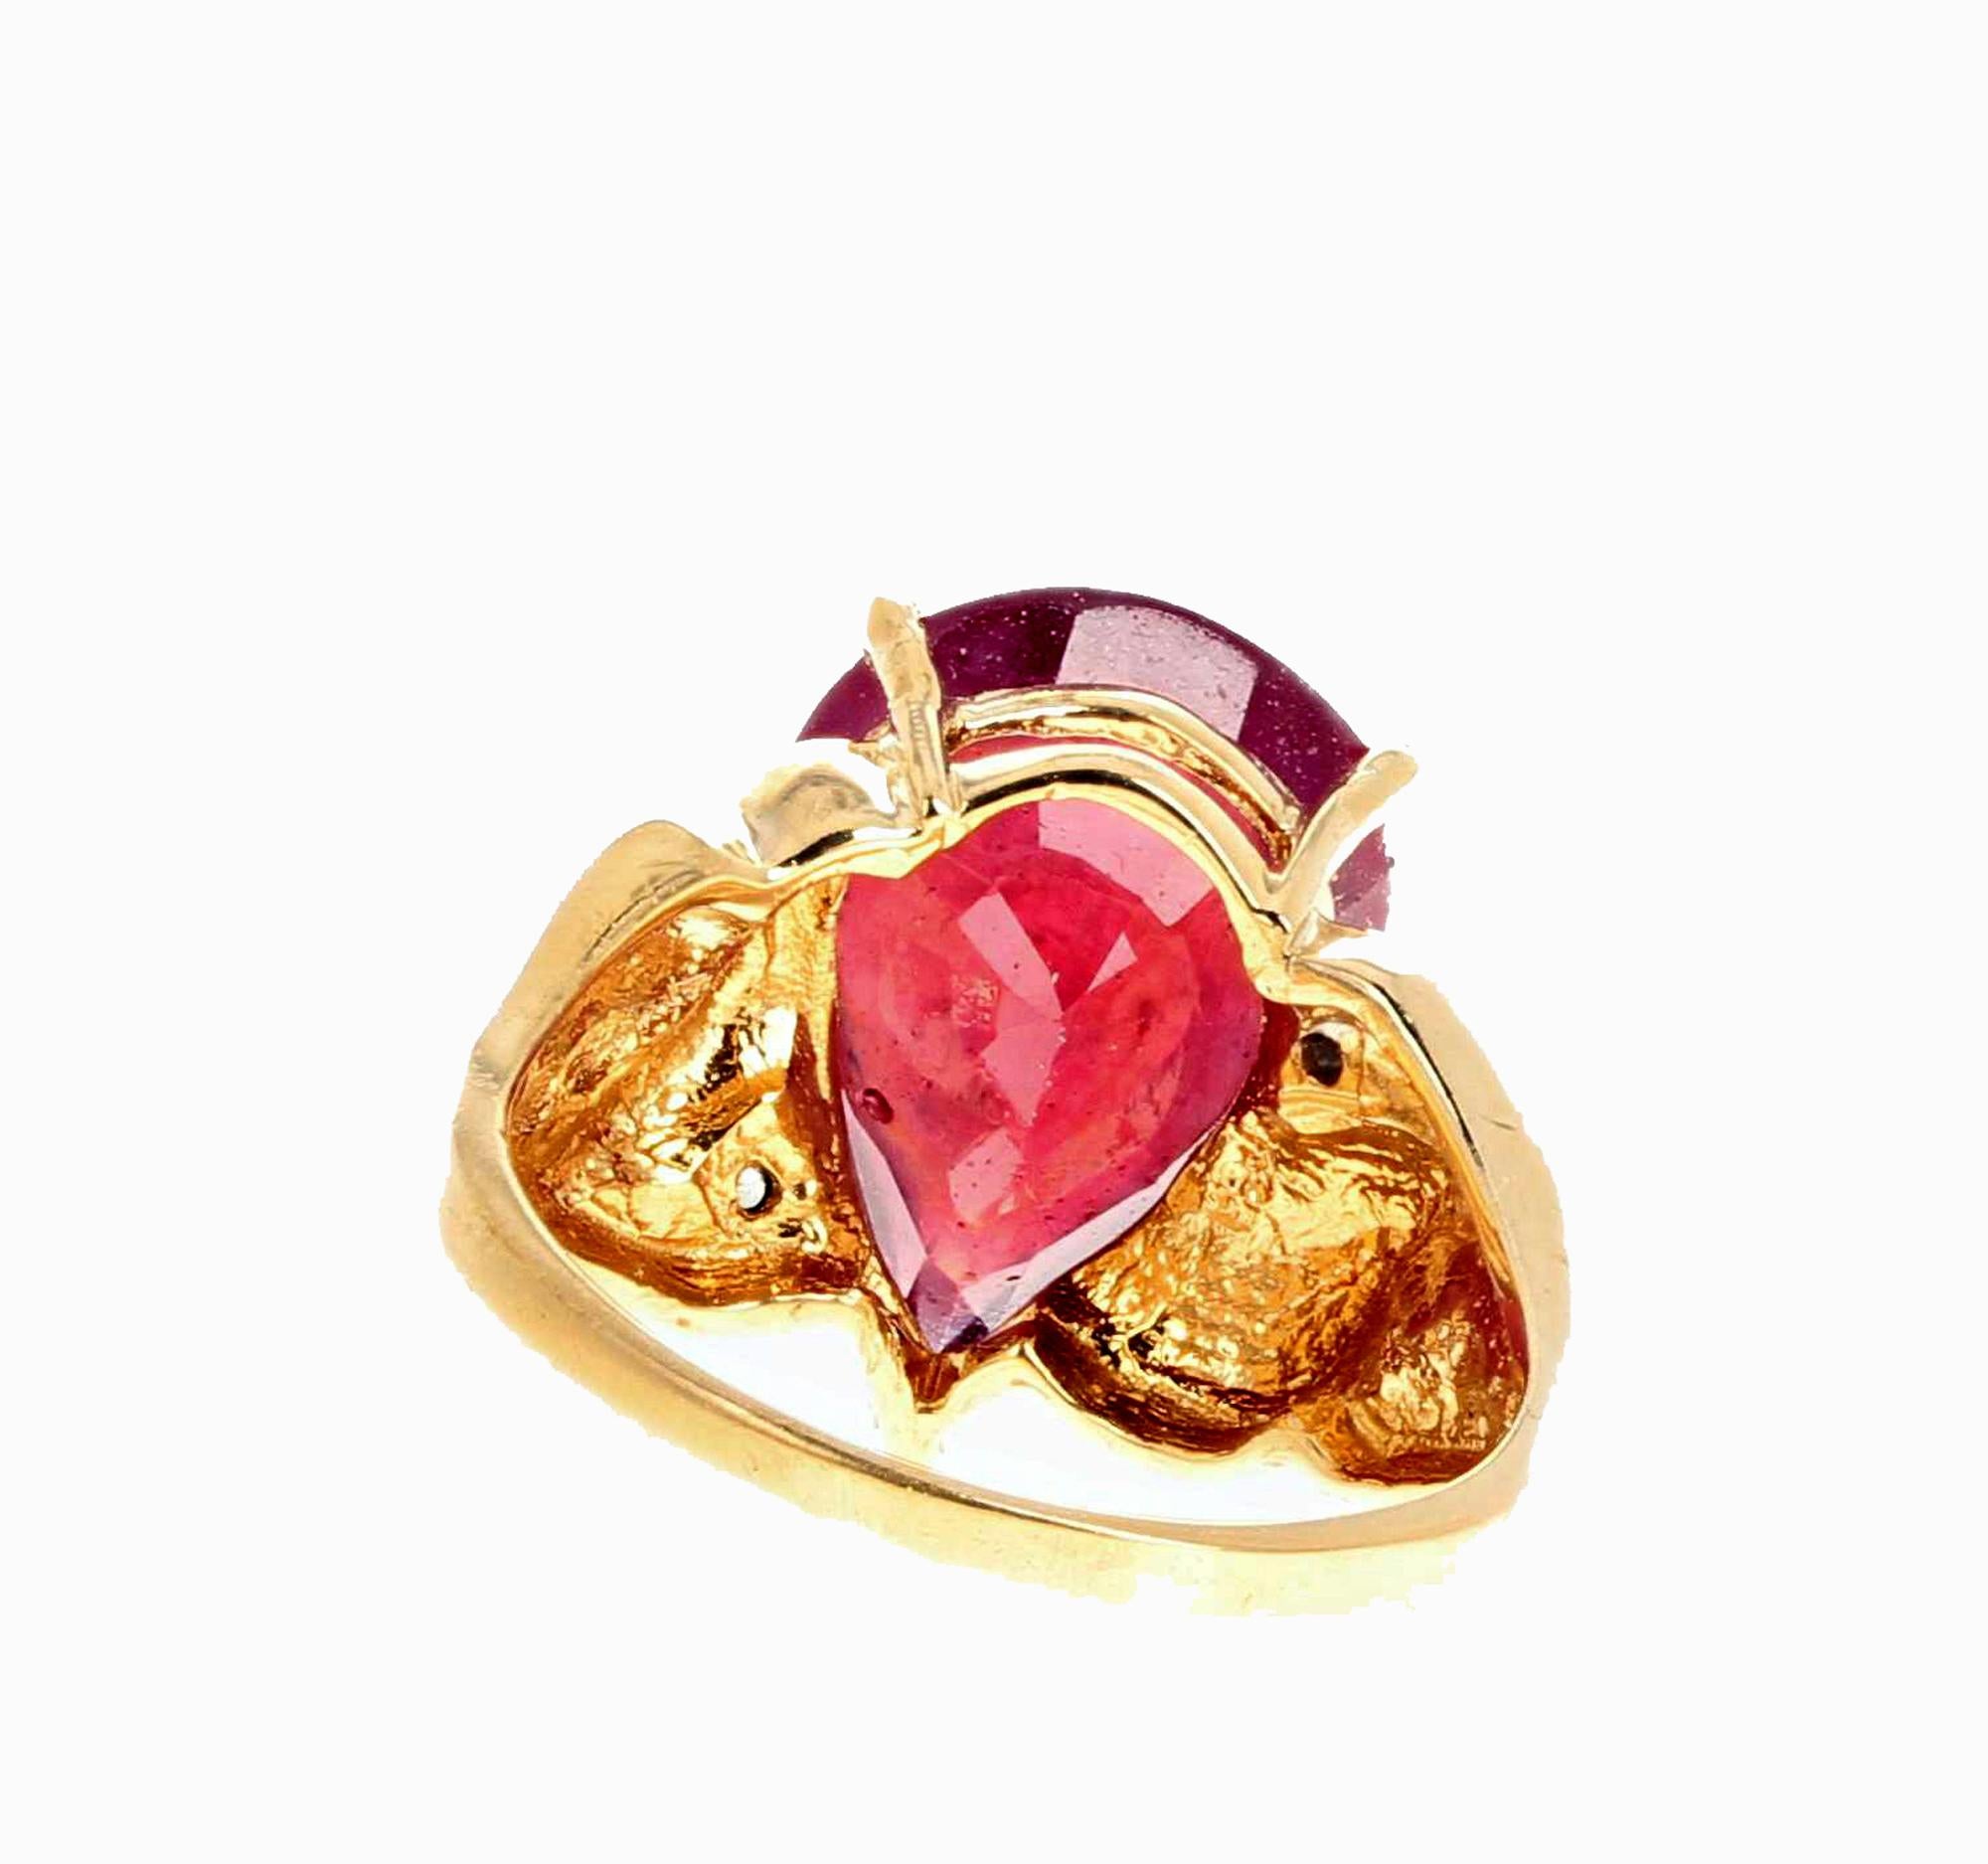 AJD Intense GLOWING Red 7.78 Ct. Natural Sapphire & Diamond 14K Yellow Gold Ring For Sale 1